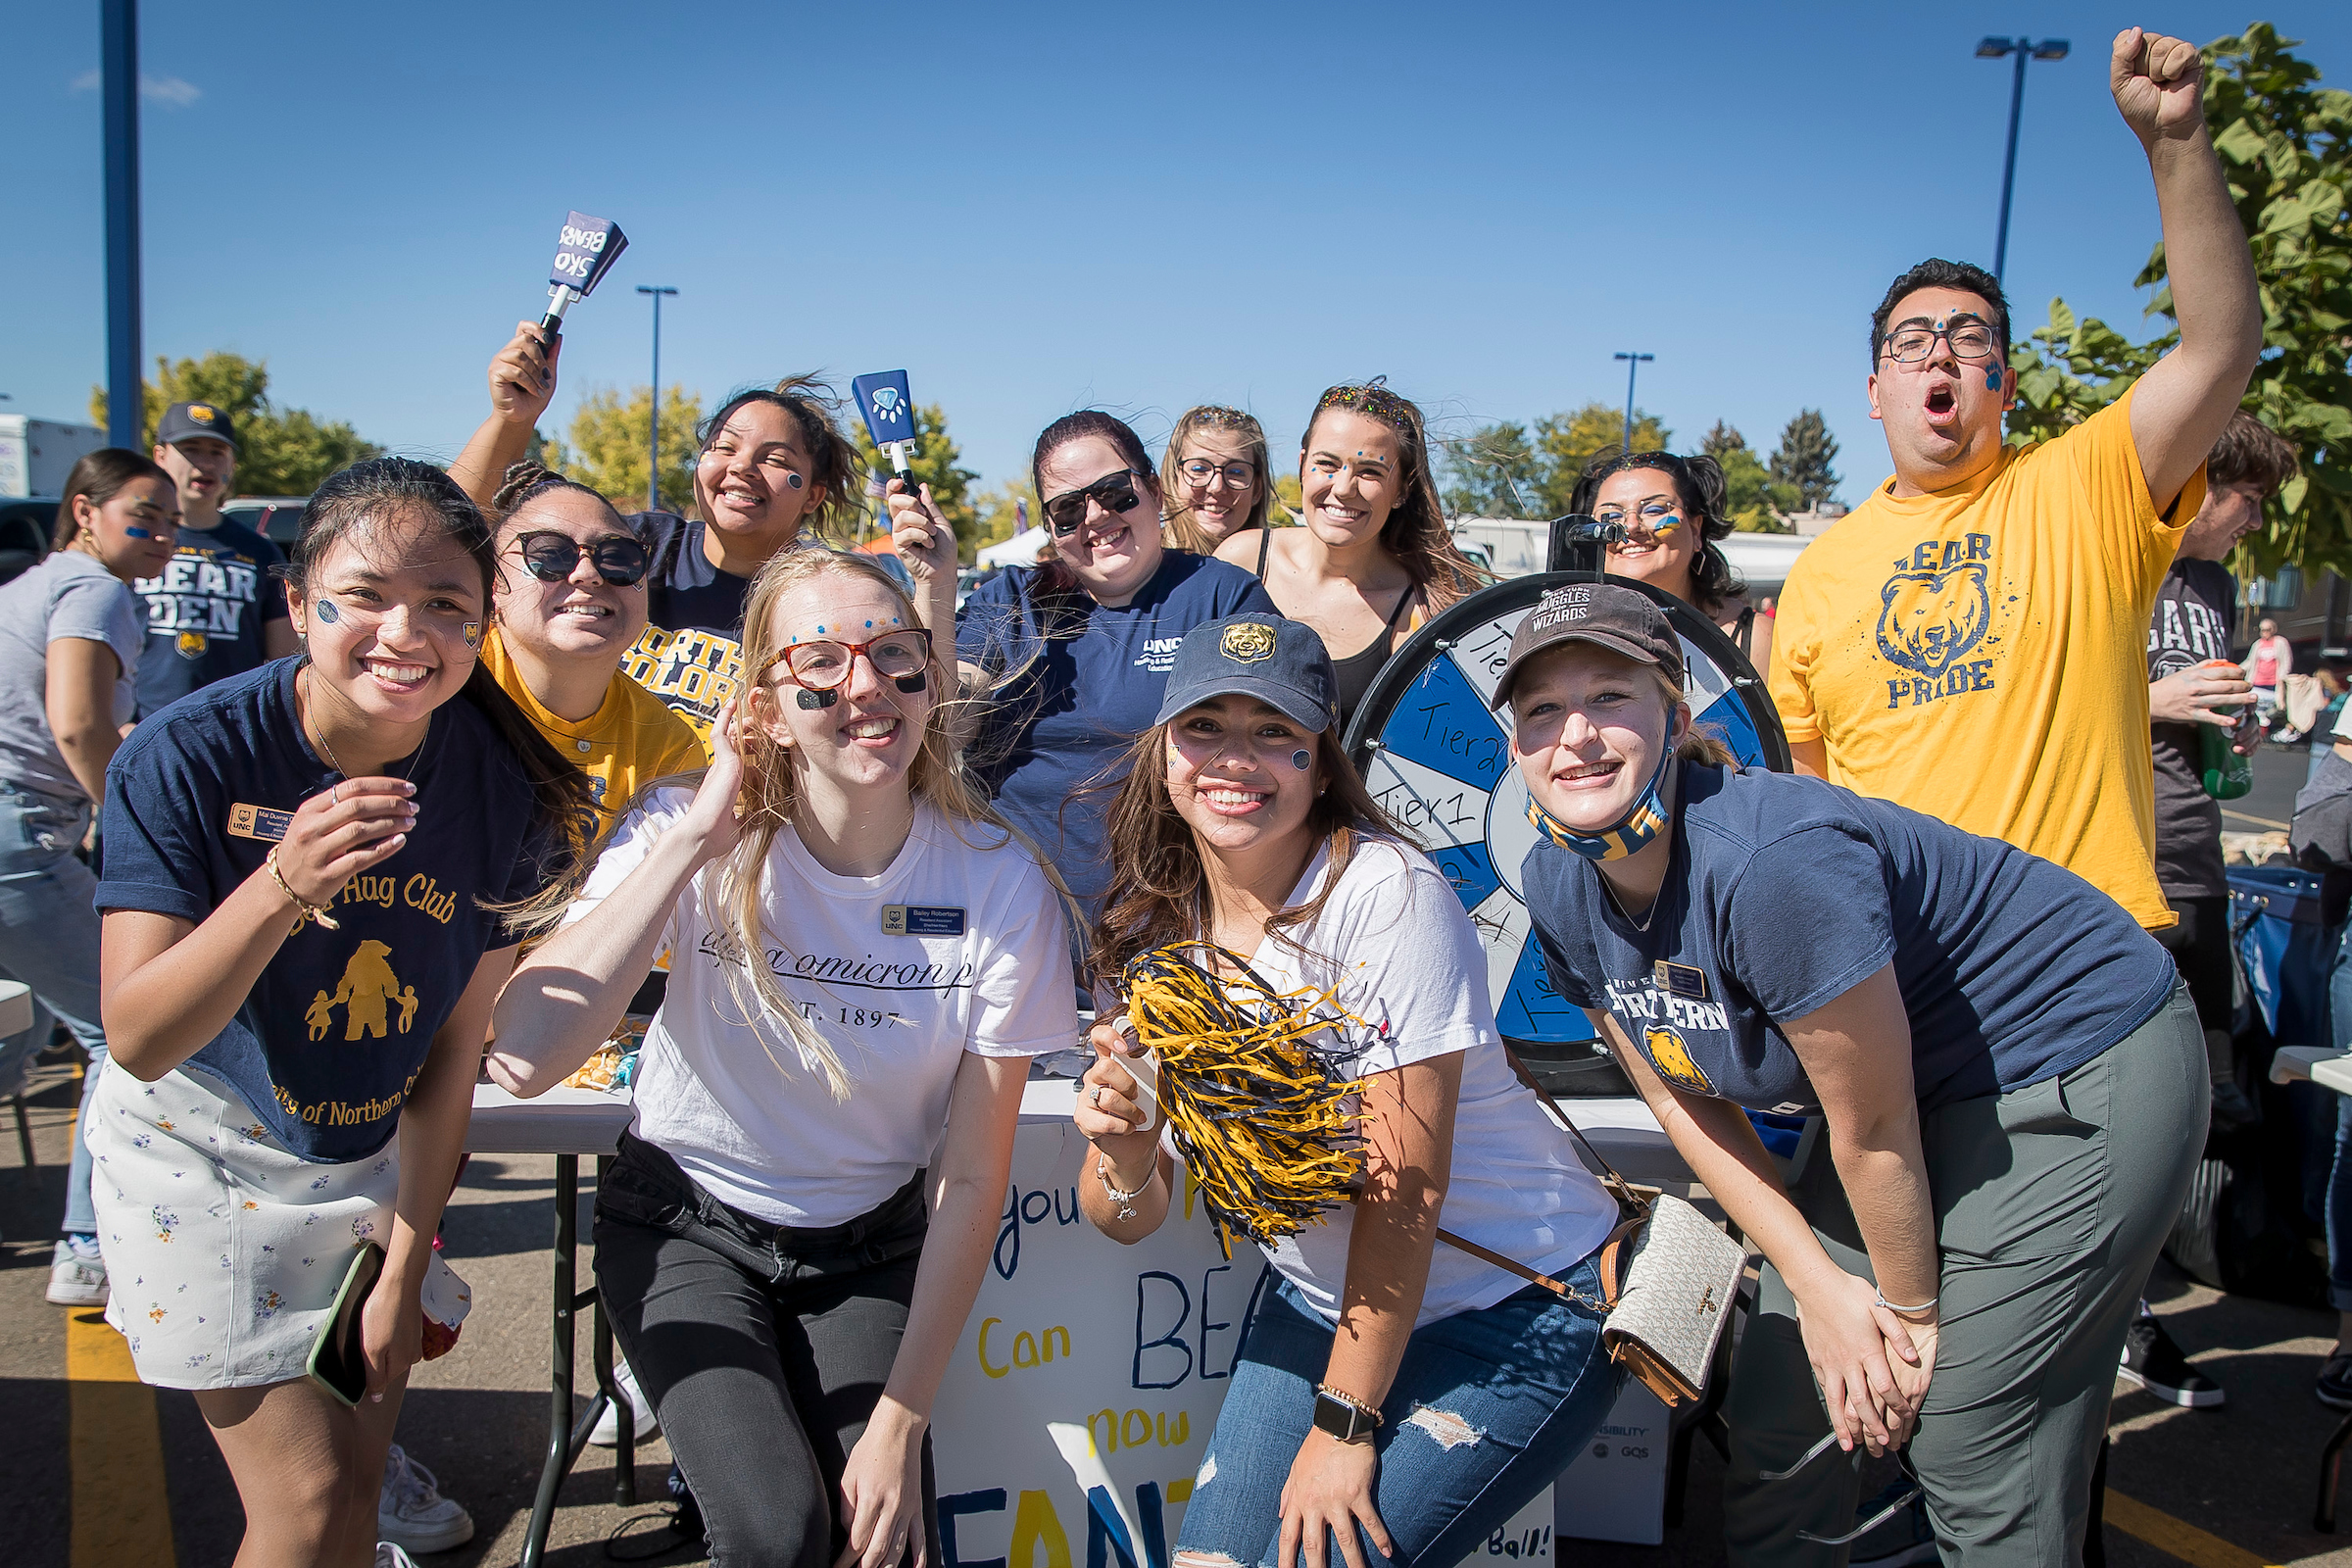 Fans join the tailgate fun